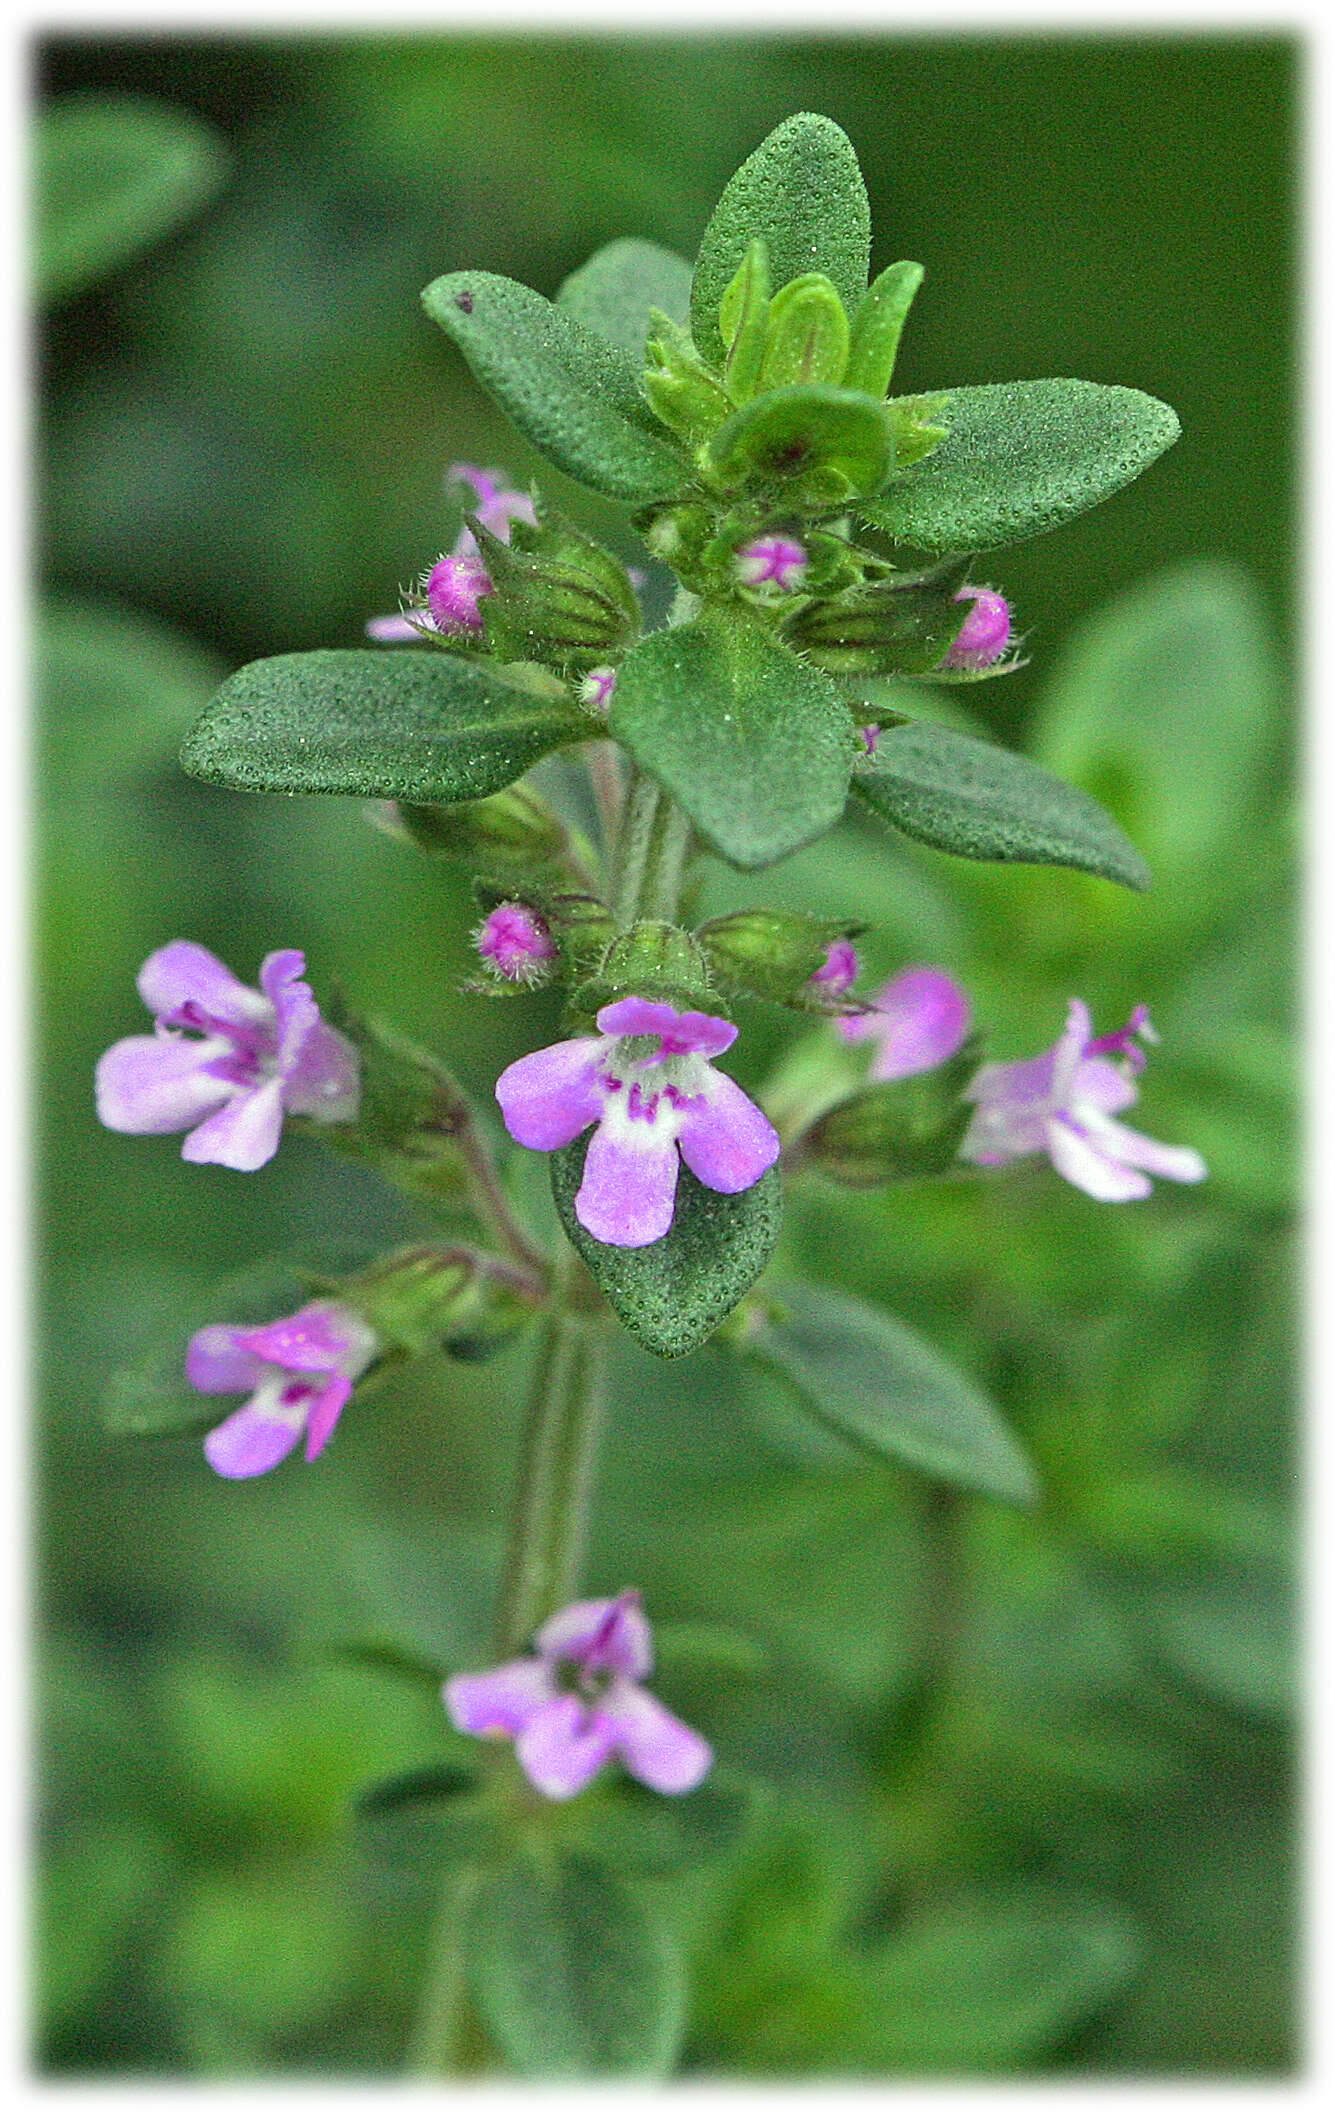 Image of Common Thyme